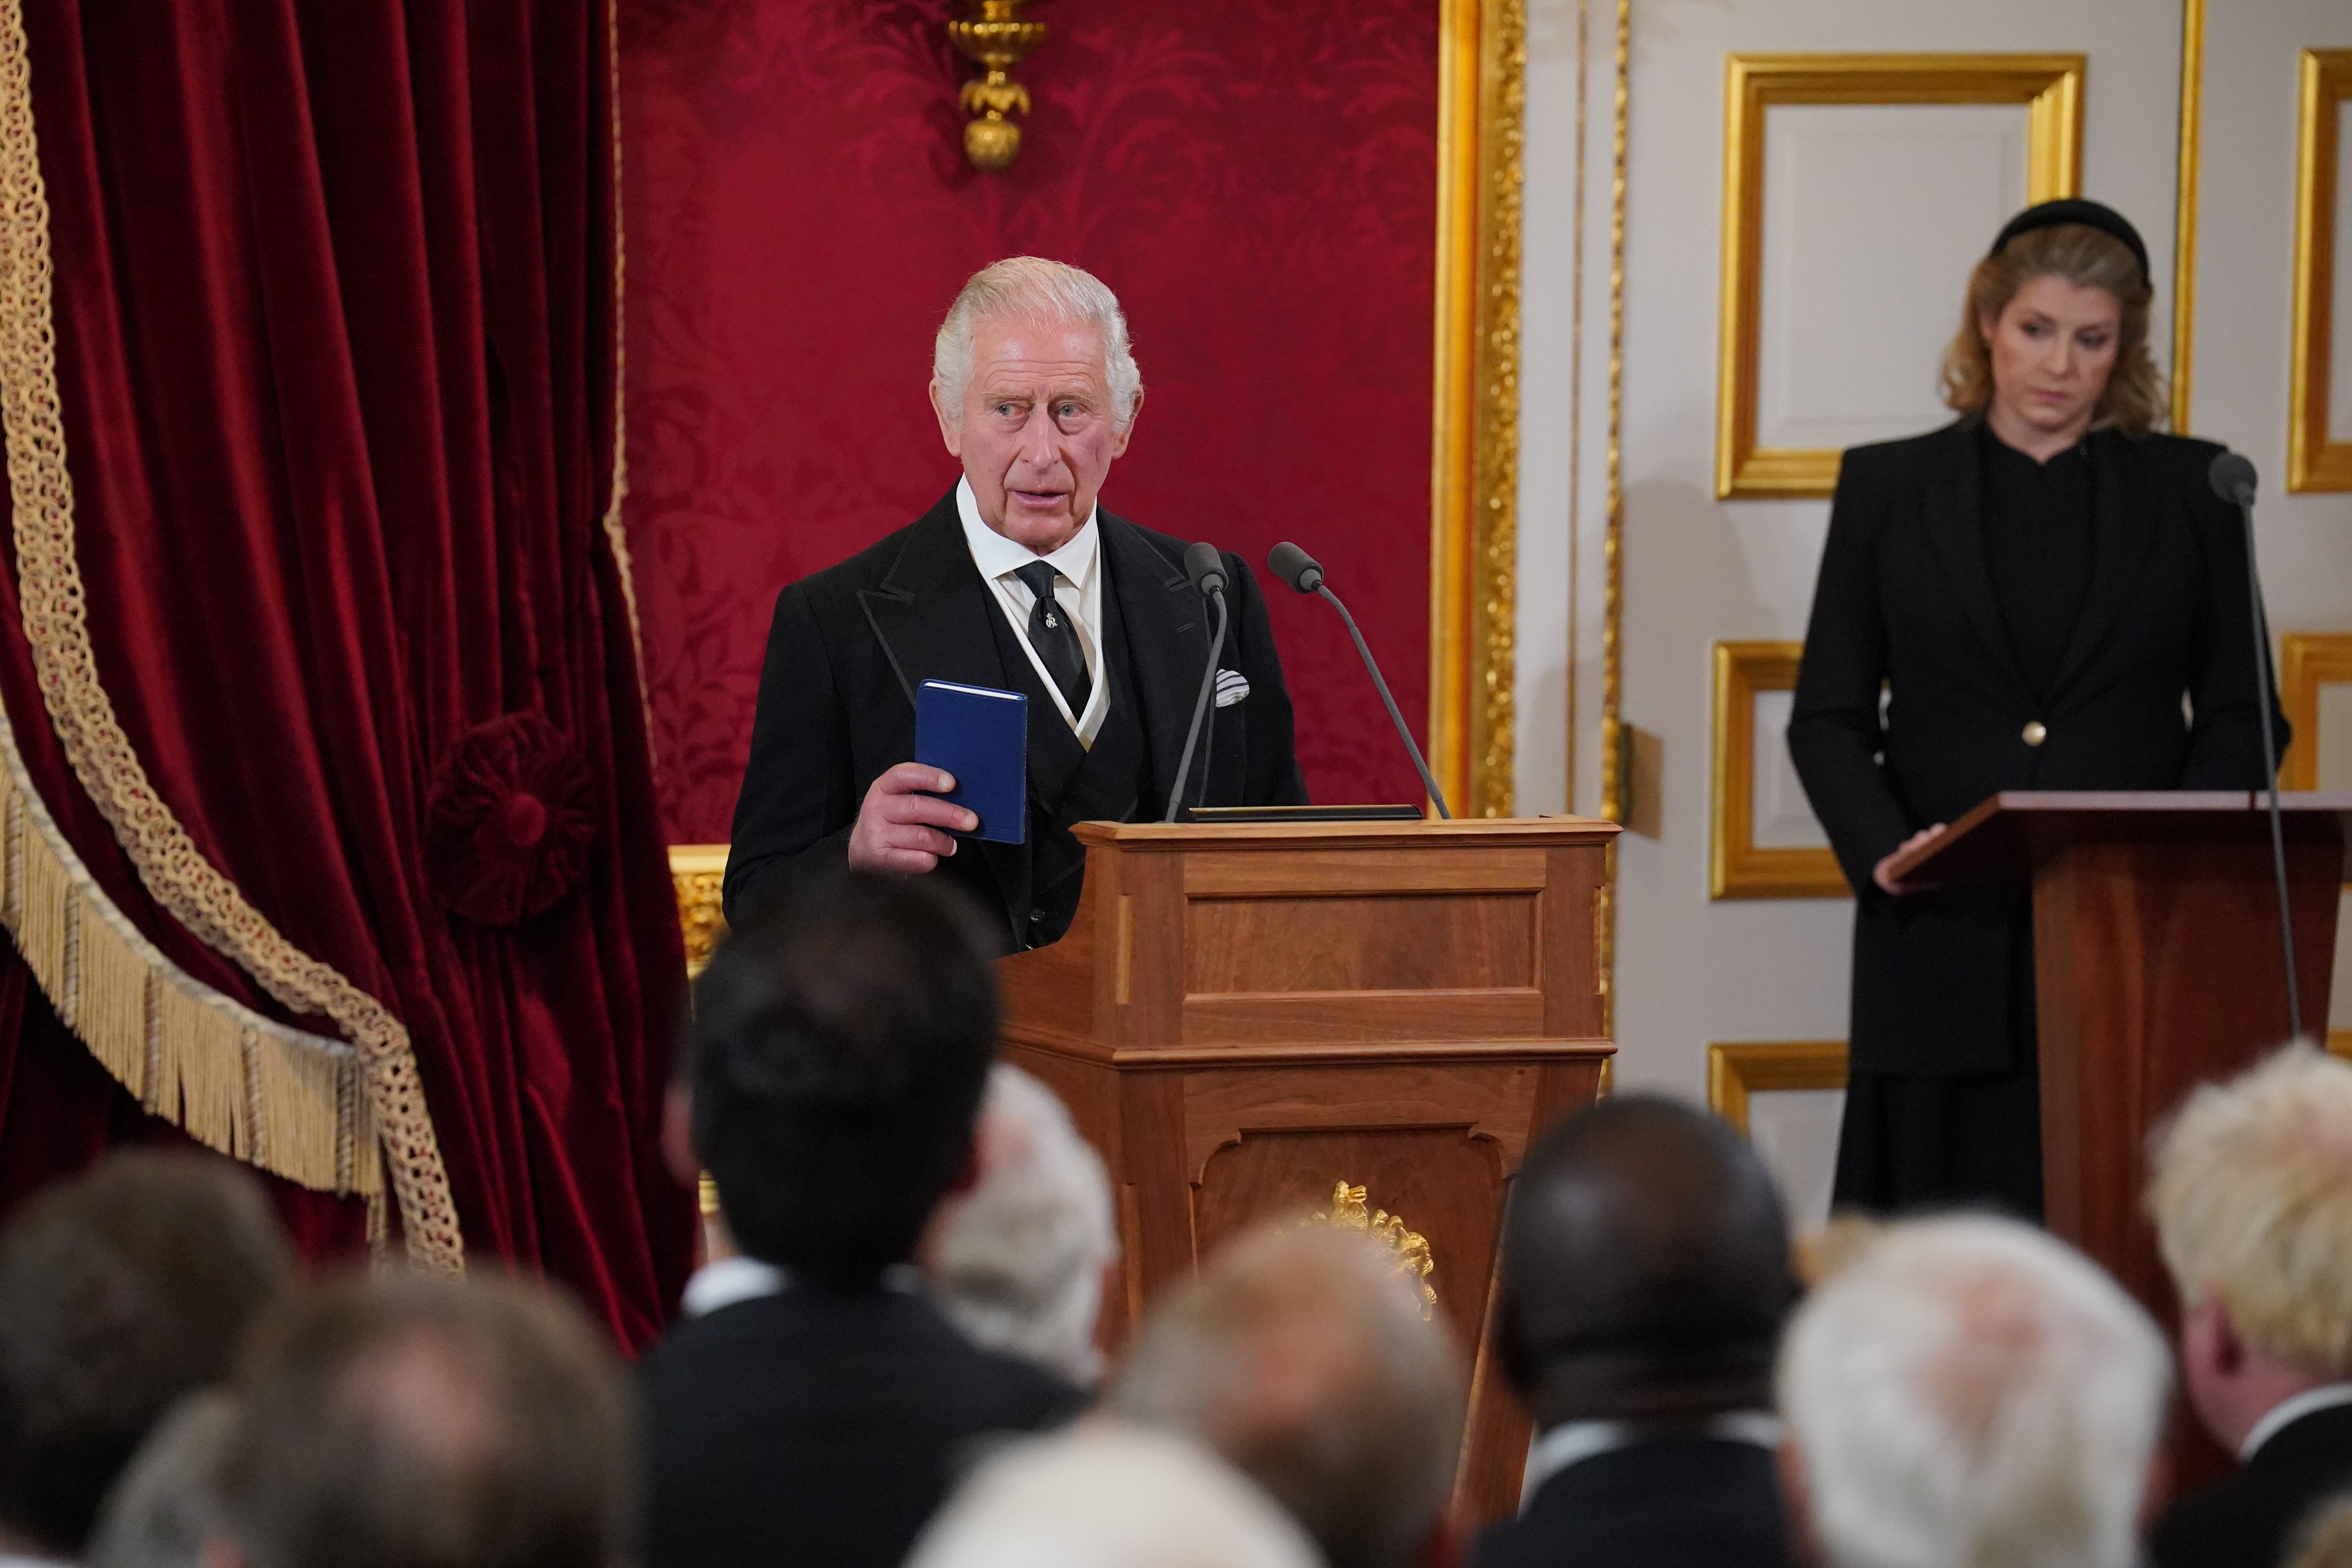 King Charles III makes his declaration during the Accession Council at St James’s Palace, London (Jonathan Brady/PA)